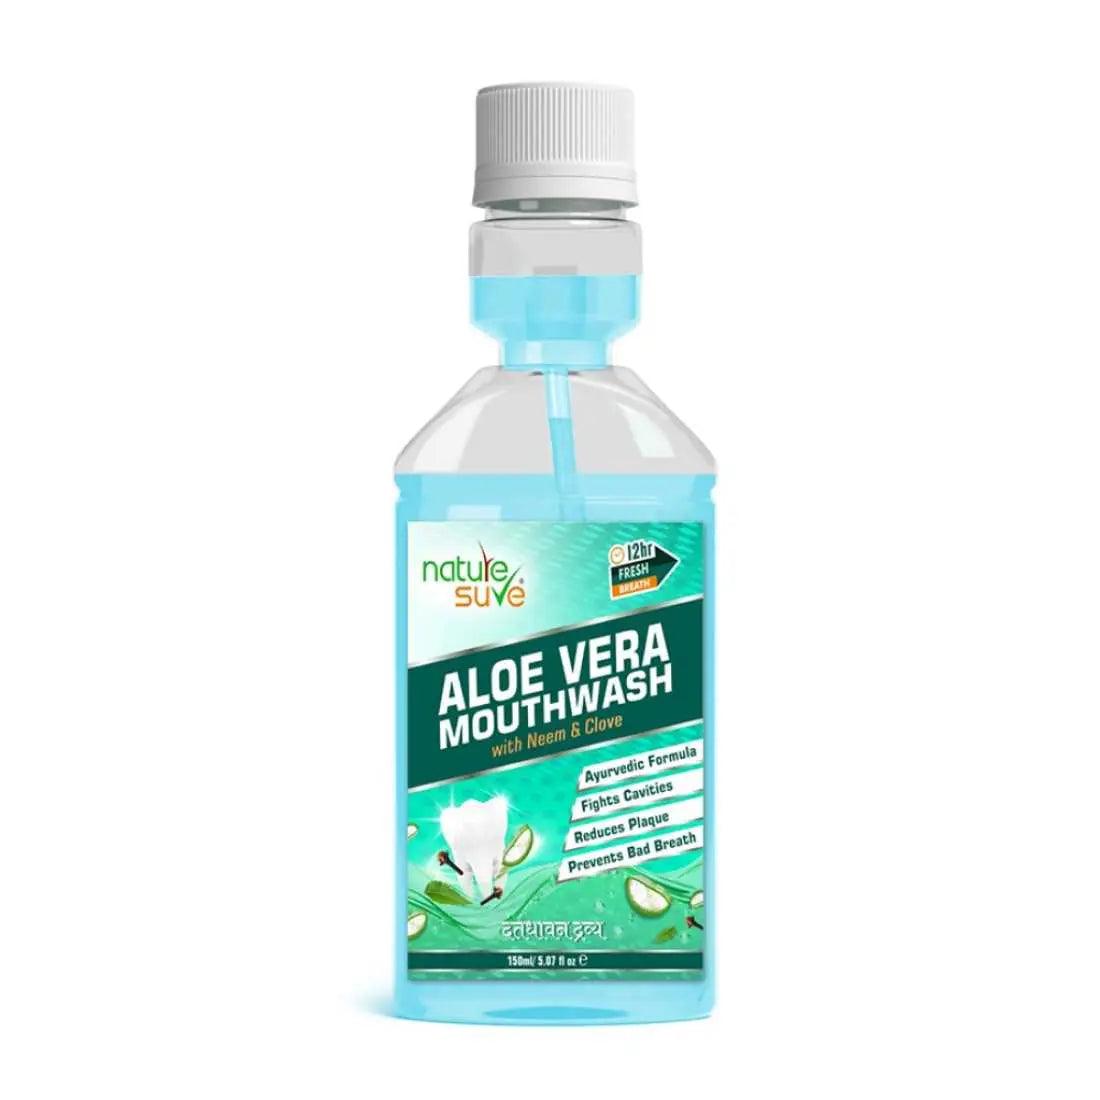 Nature Sure Aloe Vera Mouthwash with Neem and Clove Ayurvedic Formula for Oral Health in Men, Women & Kids 8906116281468